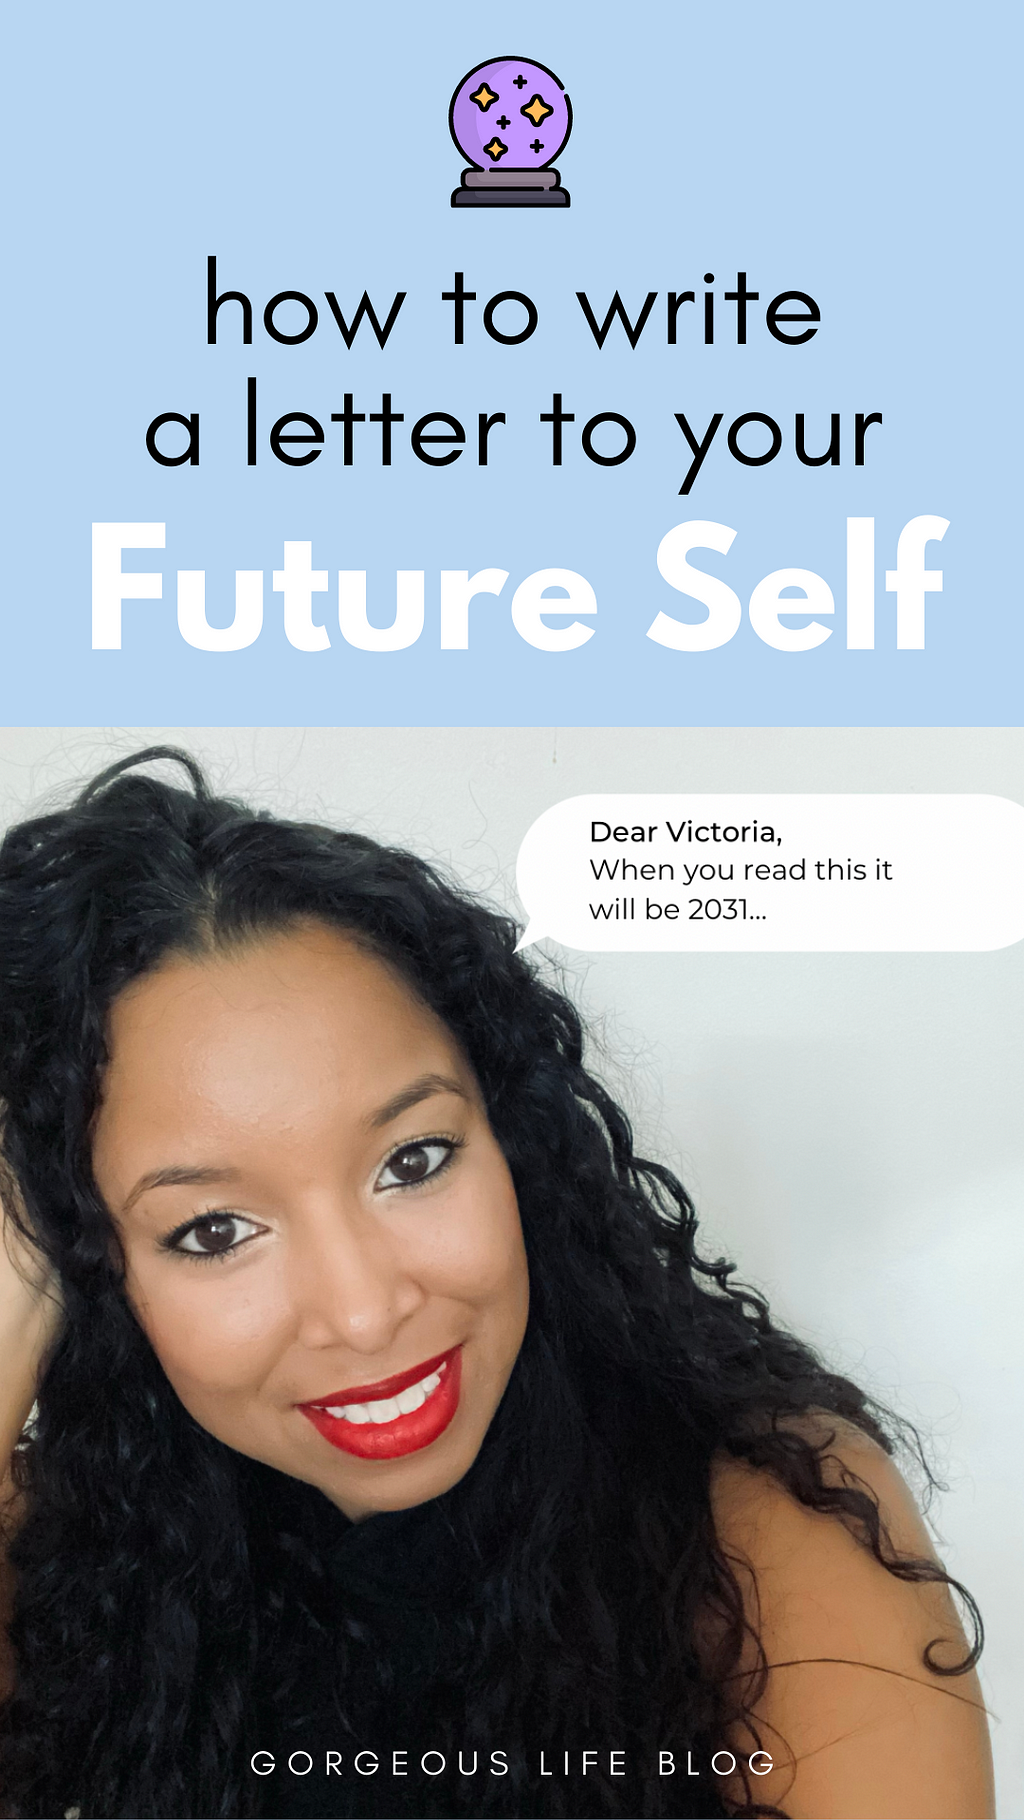 How to Write a Biography About Your Future Self: Step-by-Step Guide